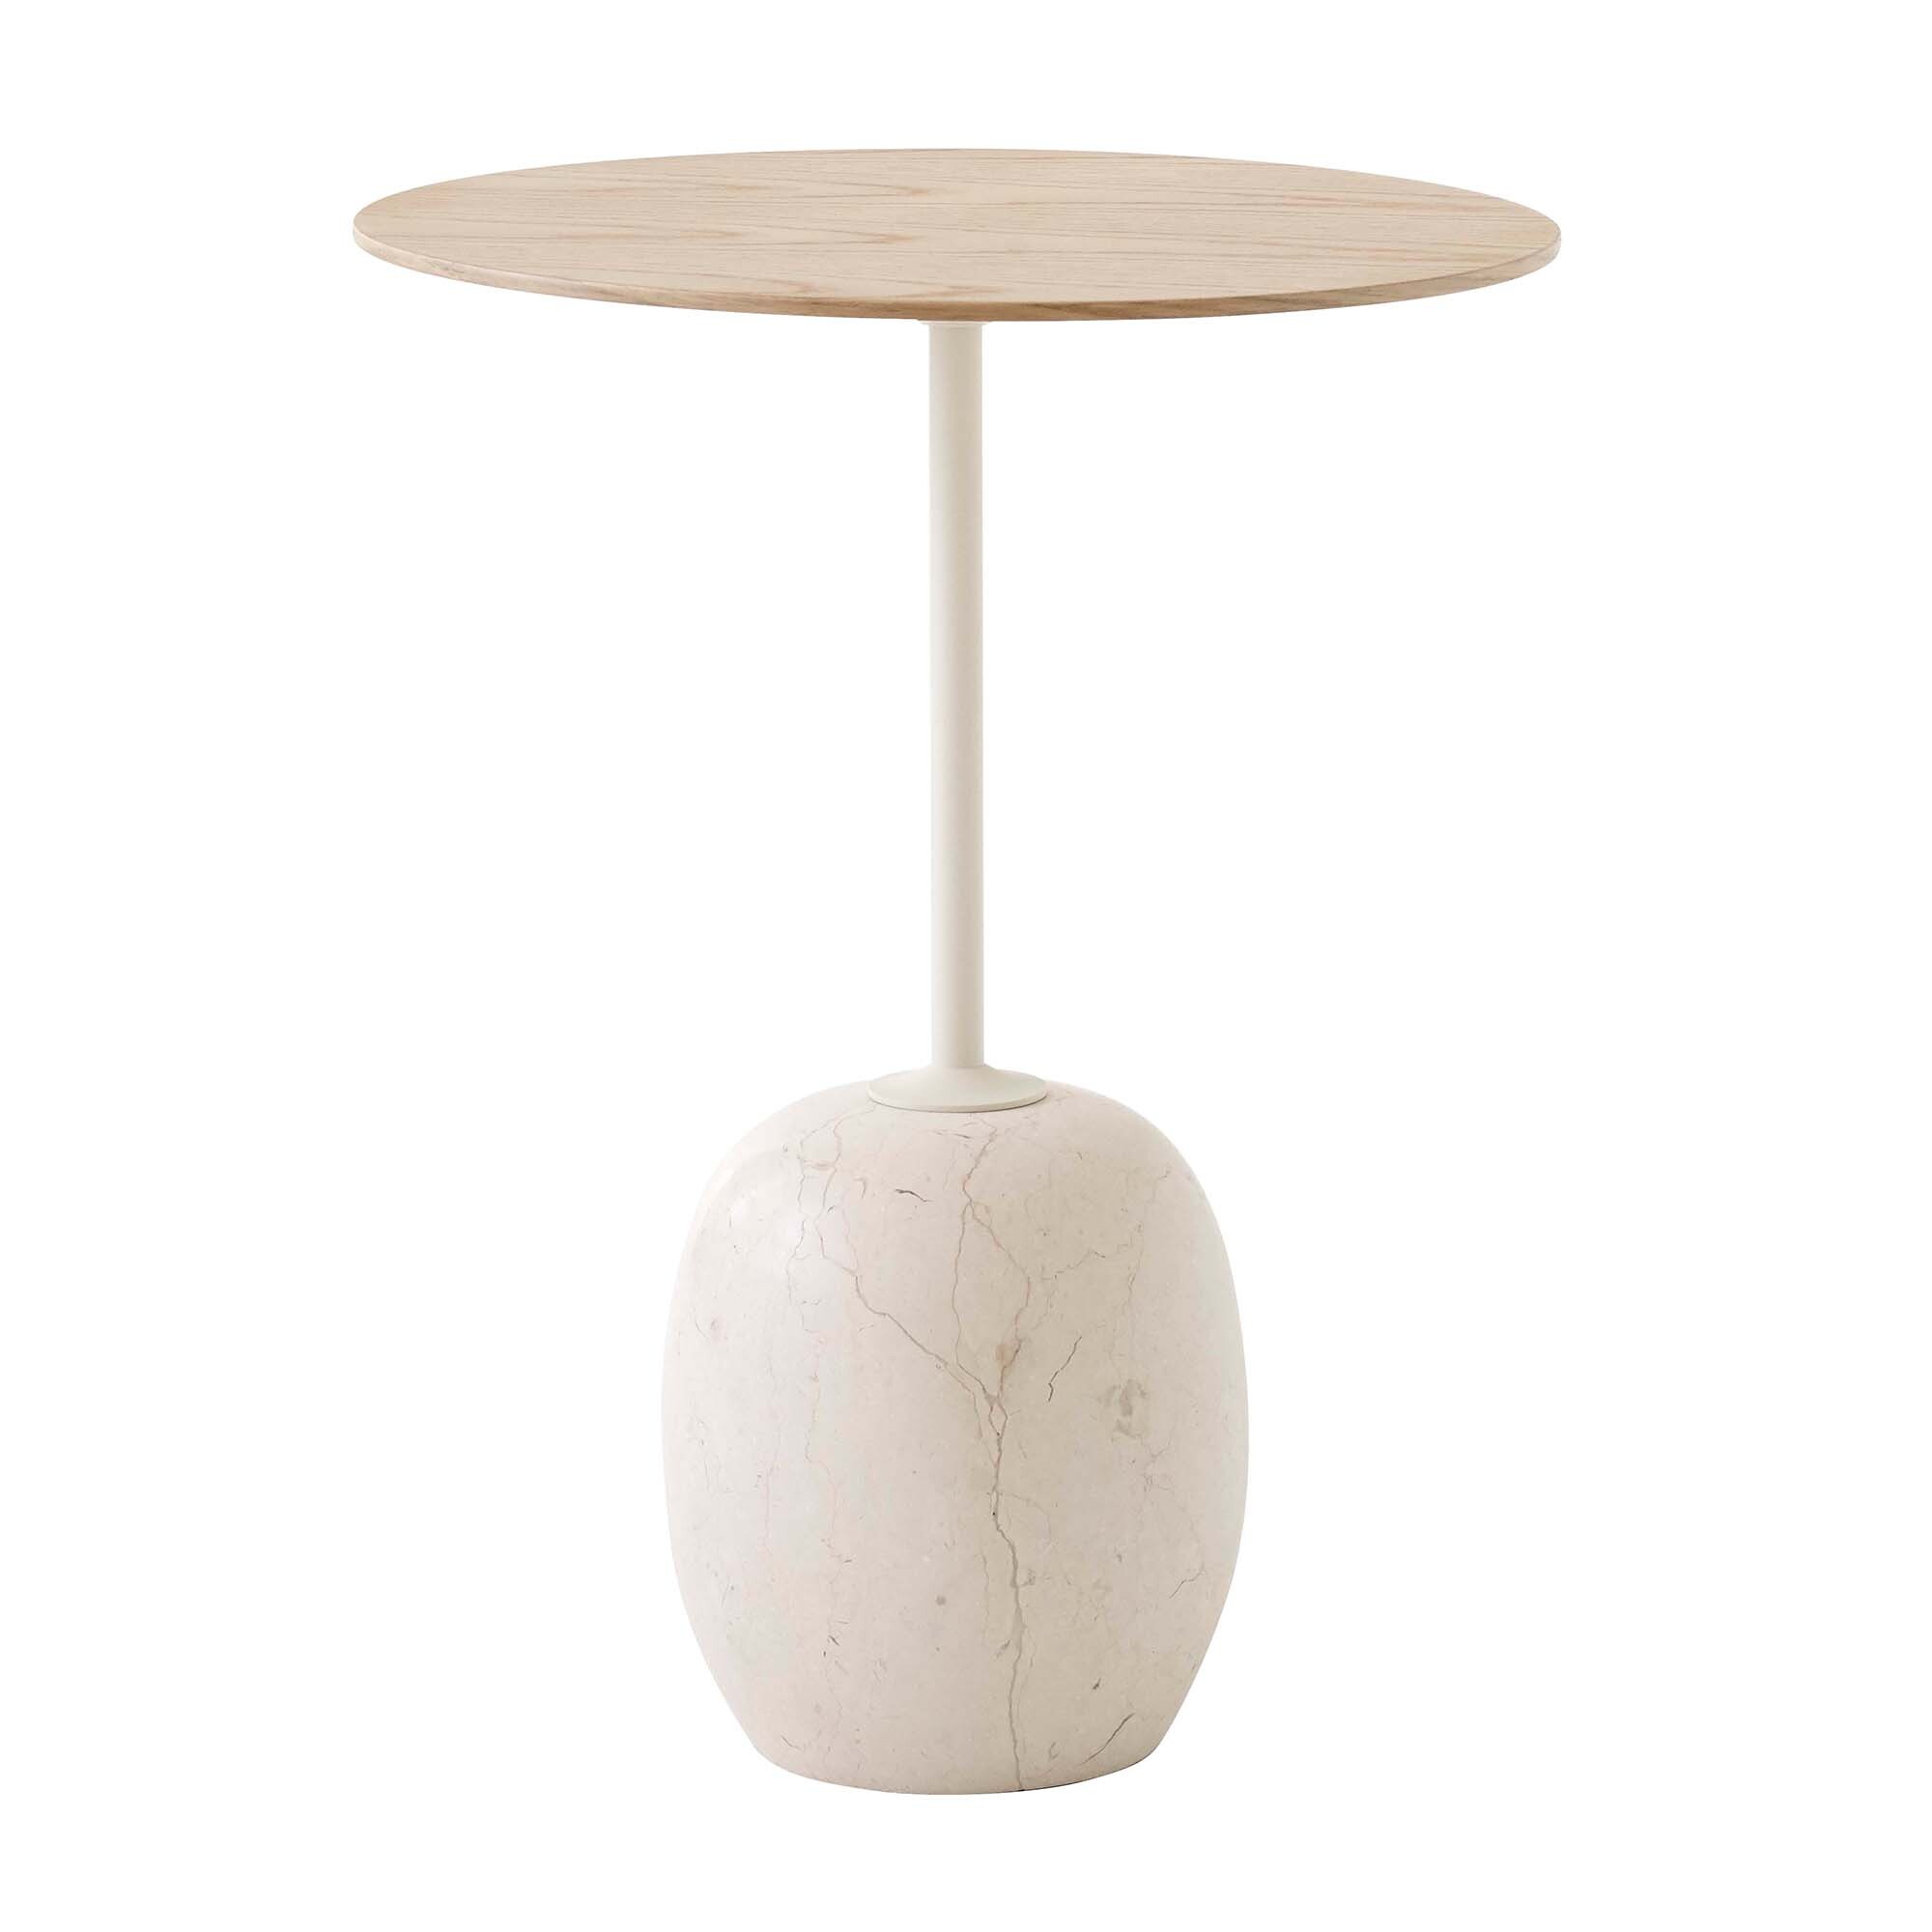 Tradition Lato Ln8 Side Table Top Wood, Round Side Table Top